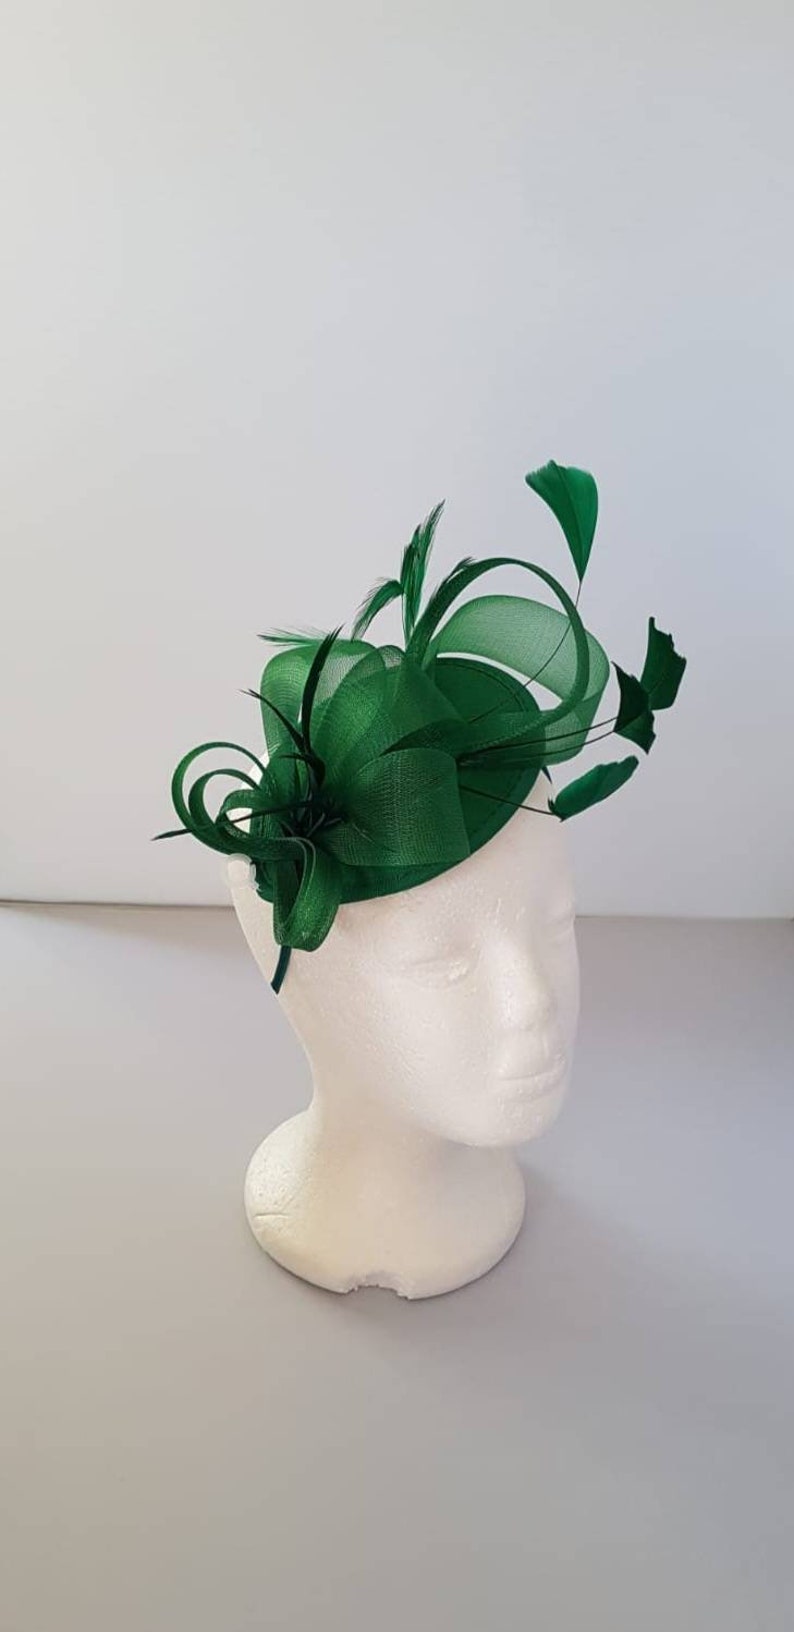 New Green Colour Fascinator Hatinator with HeadBand Weddings Races, Ascot, Kentucky Derby, Melbourne Cup Small Size image 2